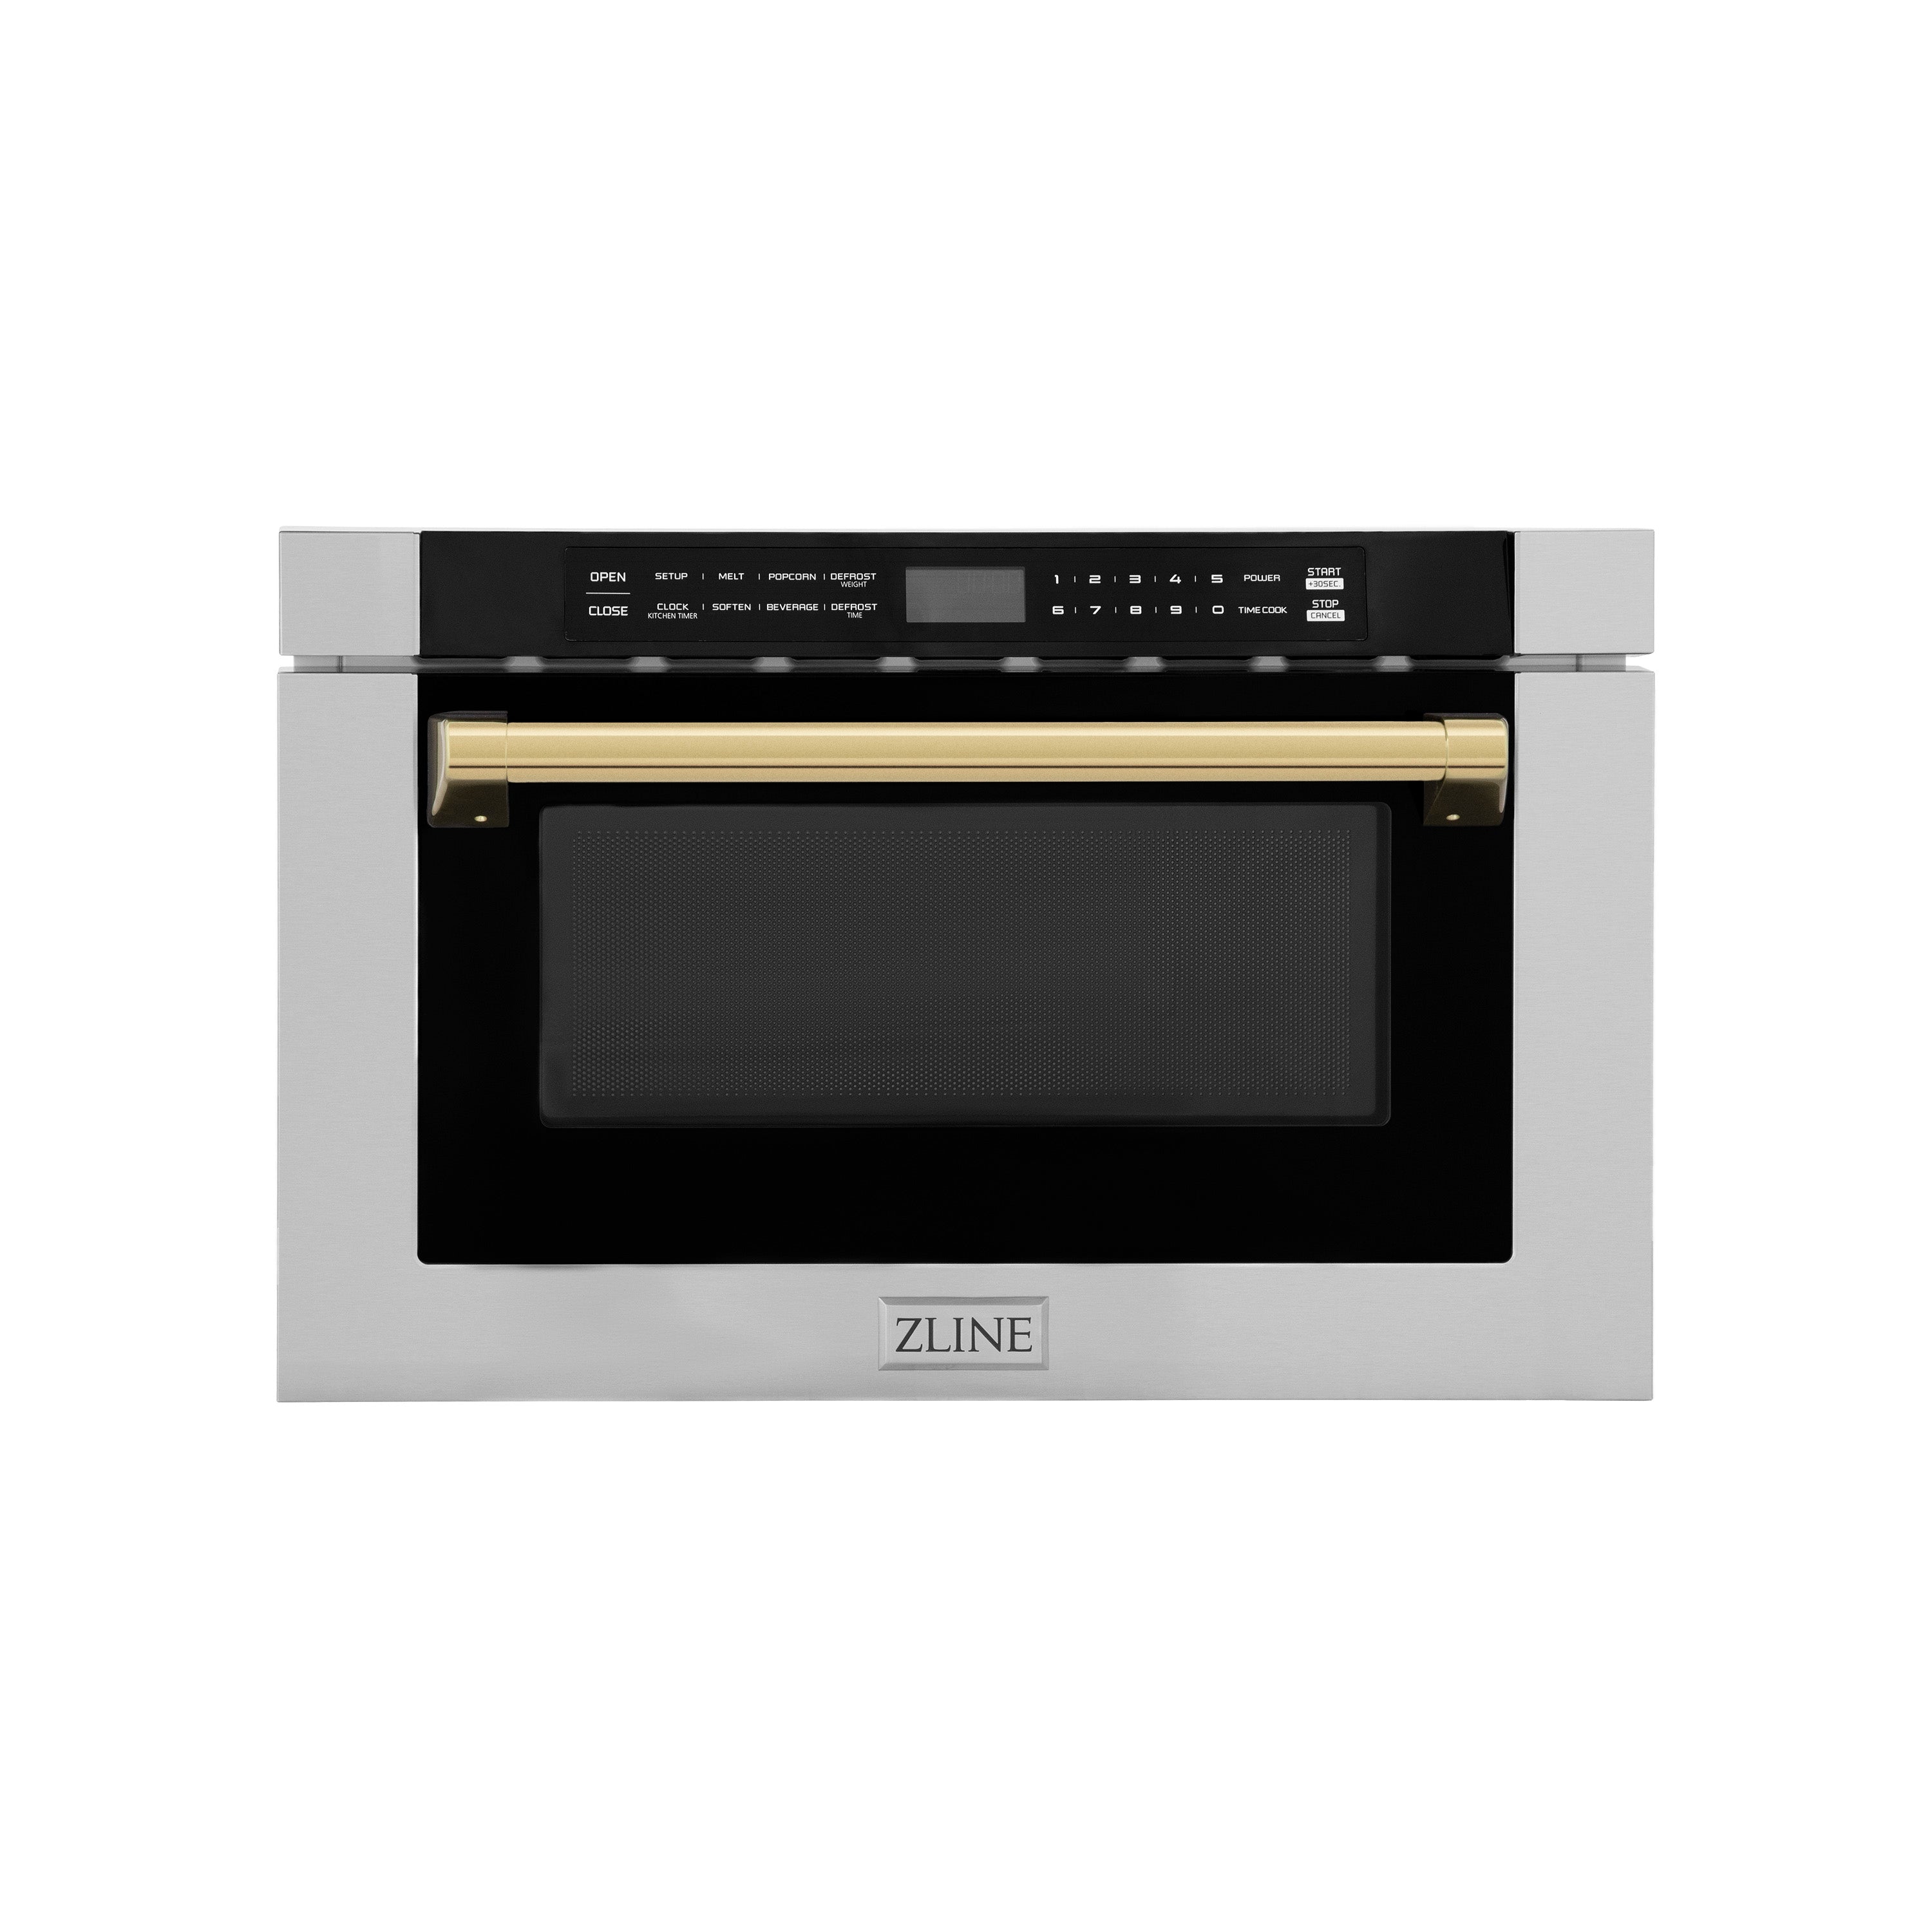 ZLINE Autograph Edition 24" 1.2 cu. ft. Built-in Microwave Drawer with a Traditional Handle in Stainless Steel and Champagne Bronze Accents (MWDZ-1-H-CB) - New Star Living